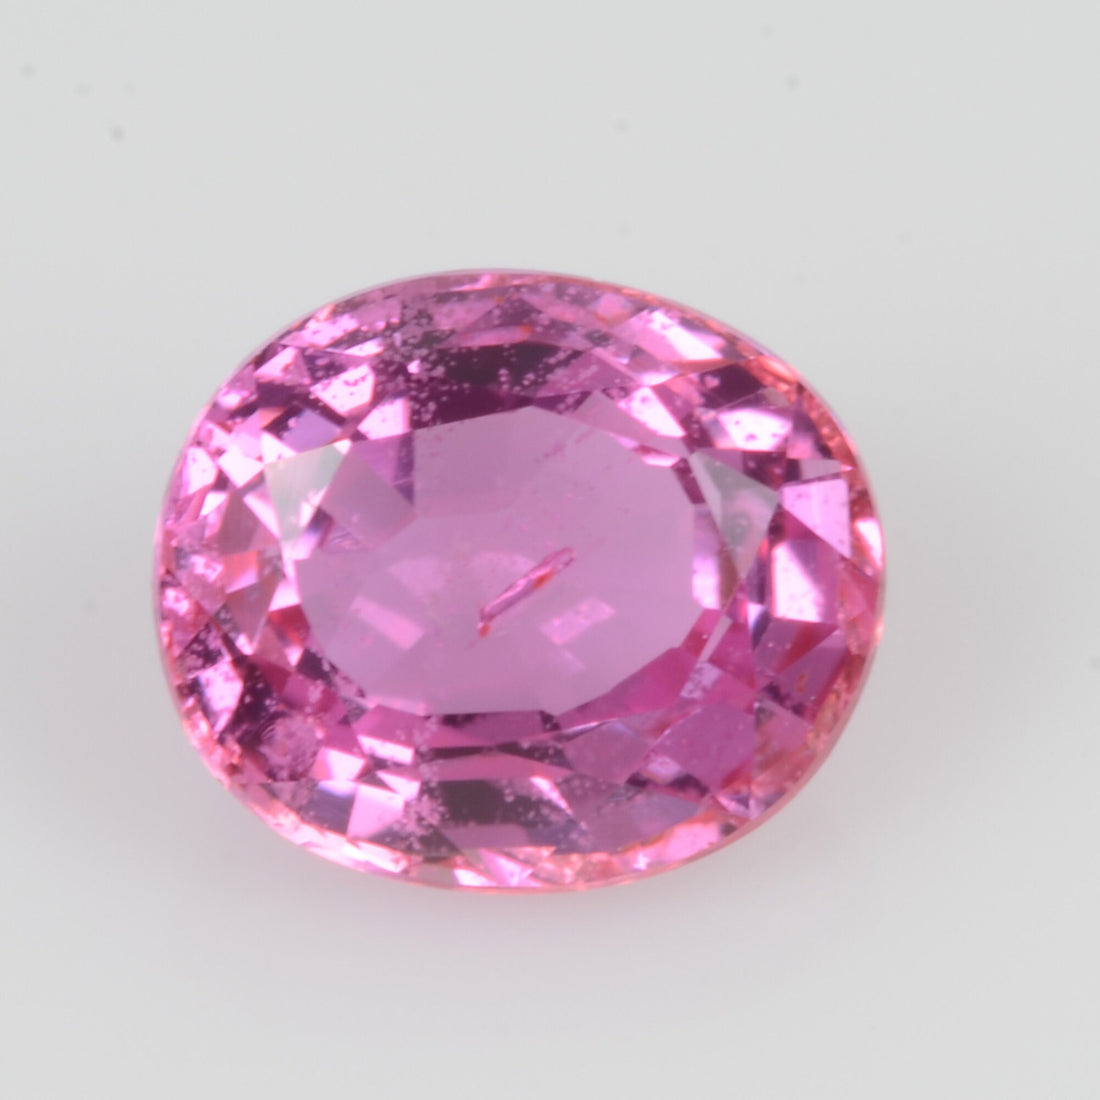 1.28 cts Natural Pink Sapphire Loose Gemstone oval Cut